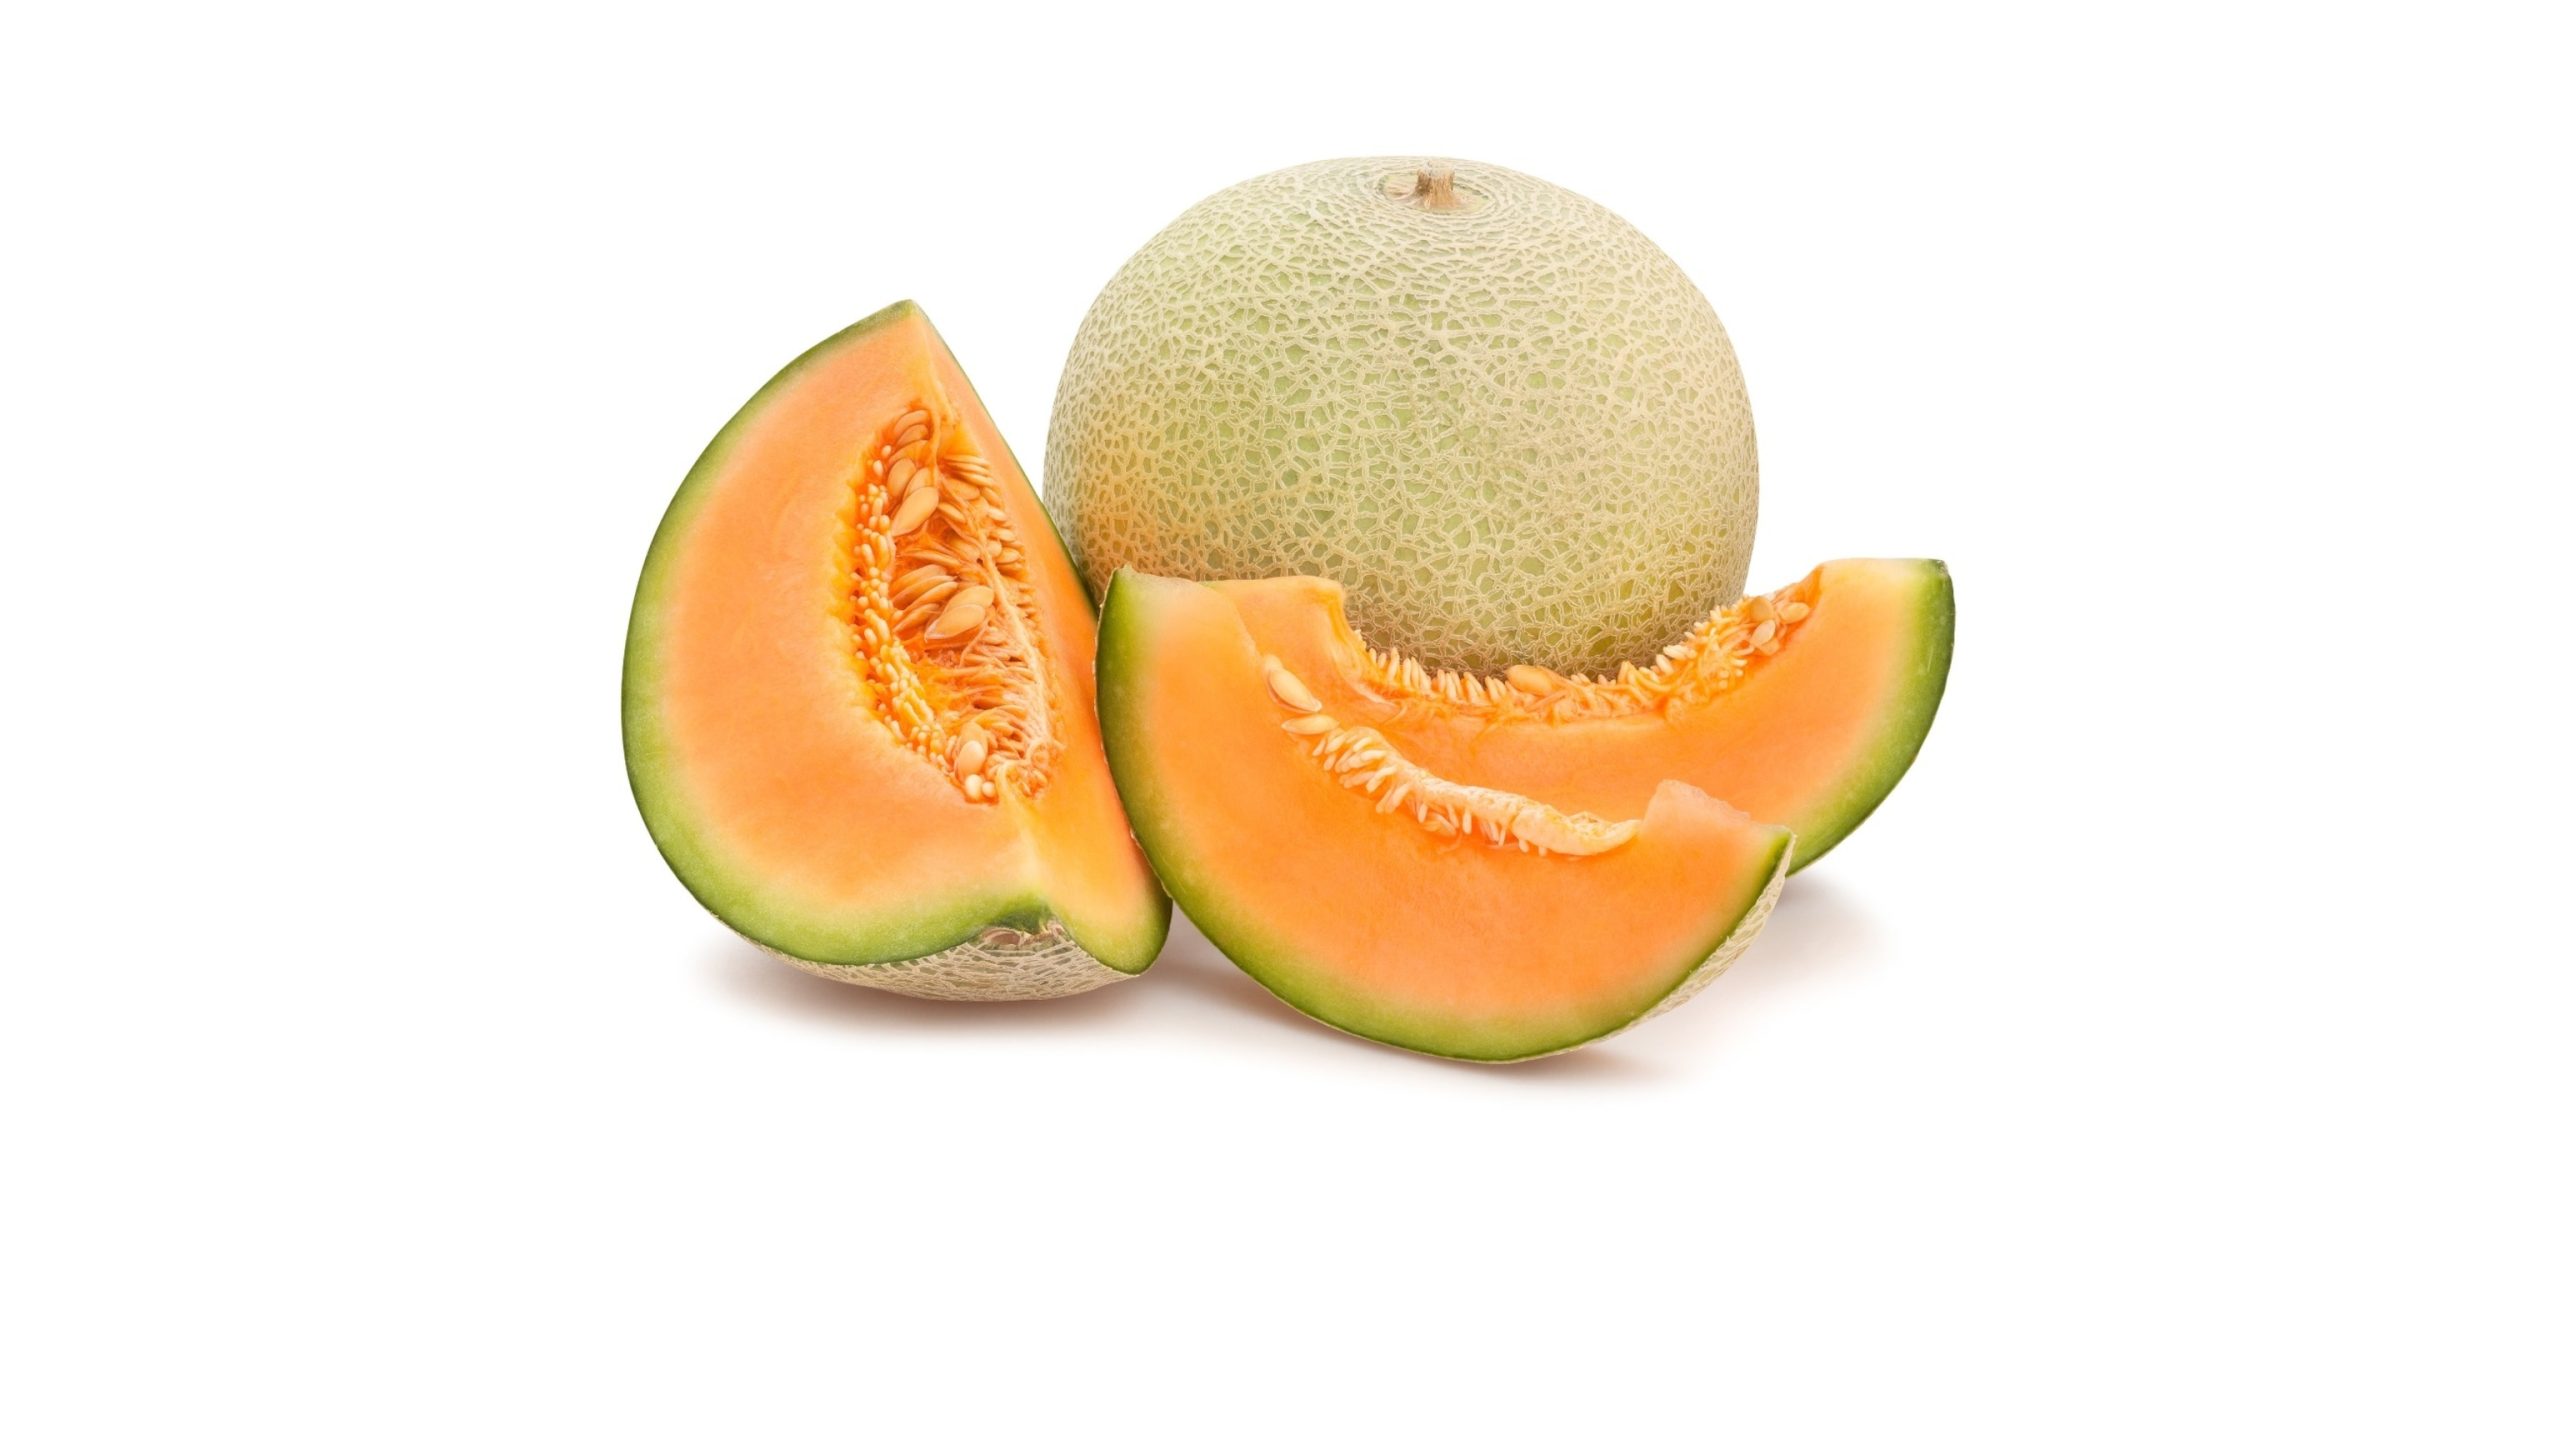 CDC reports salmonella outbreak in 32 states resulting in 2 fatalities, attributed to consumption of cantaloupes